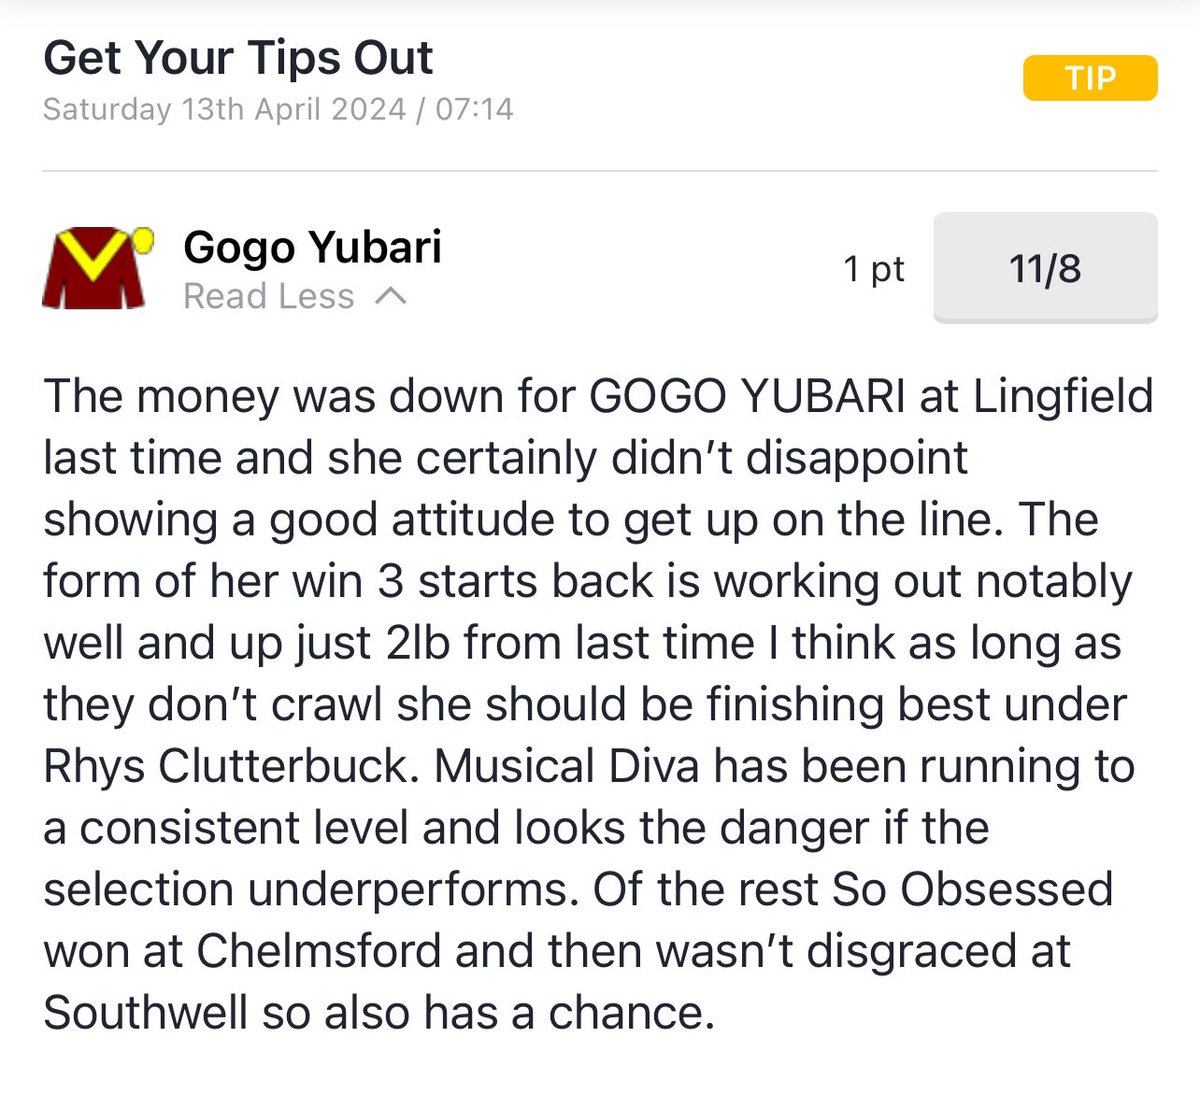 GOGO YUBARI!!!!!!!!!!!!!!!!!!

NOTEBOOK LANDED!!!!!!!!!!!!!!!!!

💰 Tipped at 7/4

TAP ❤️ IF YOU GOT ON